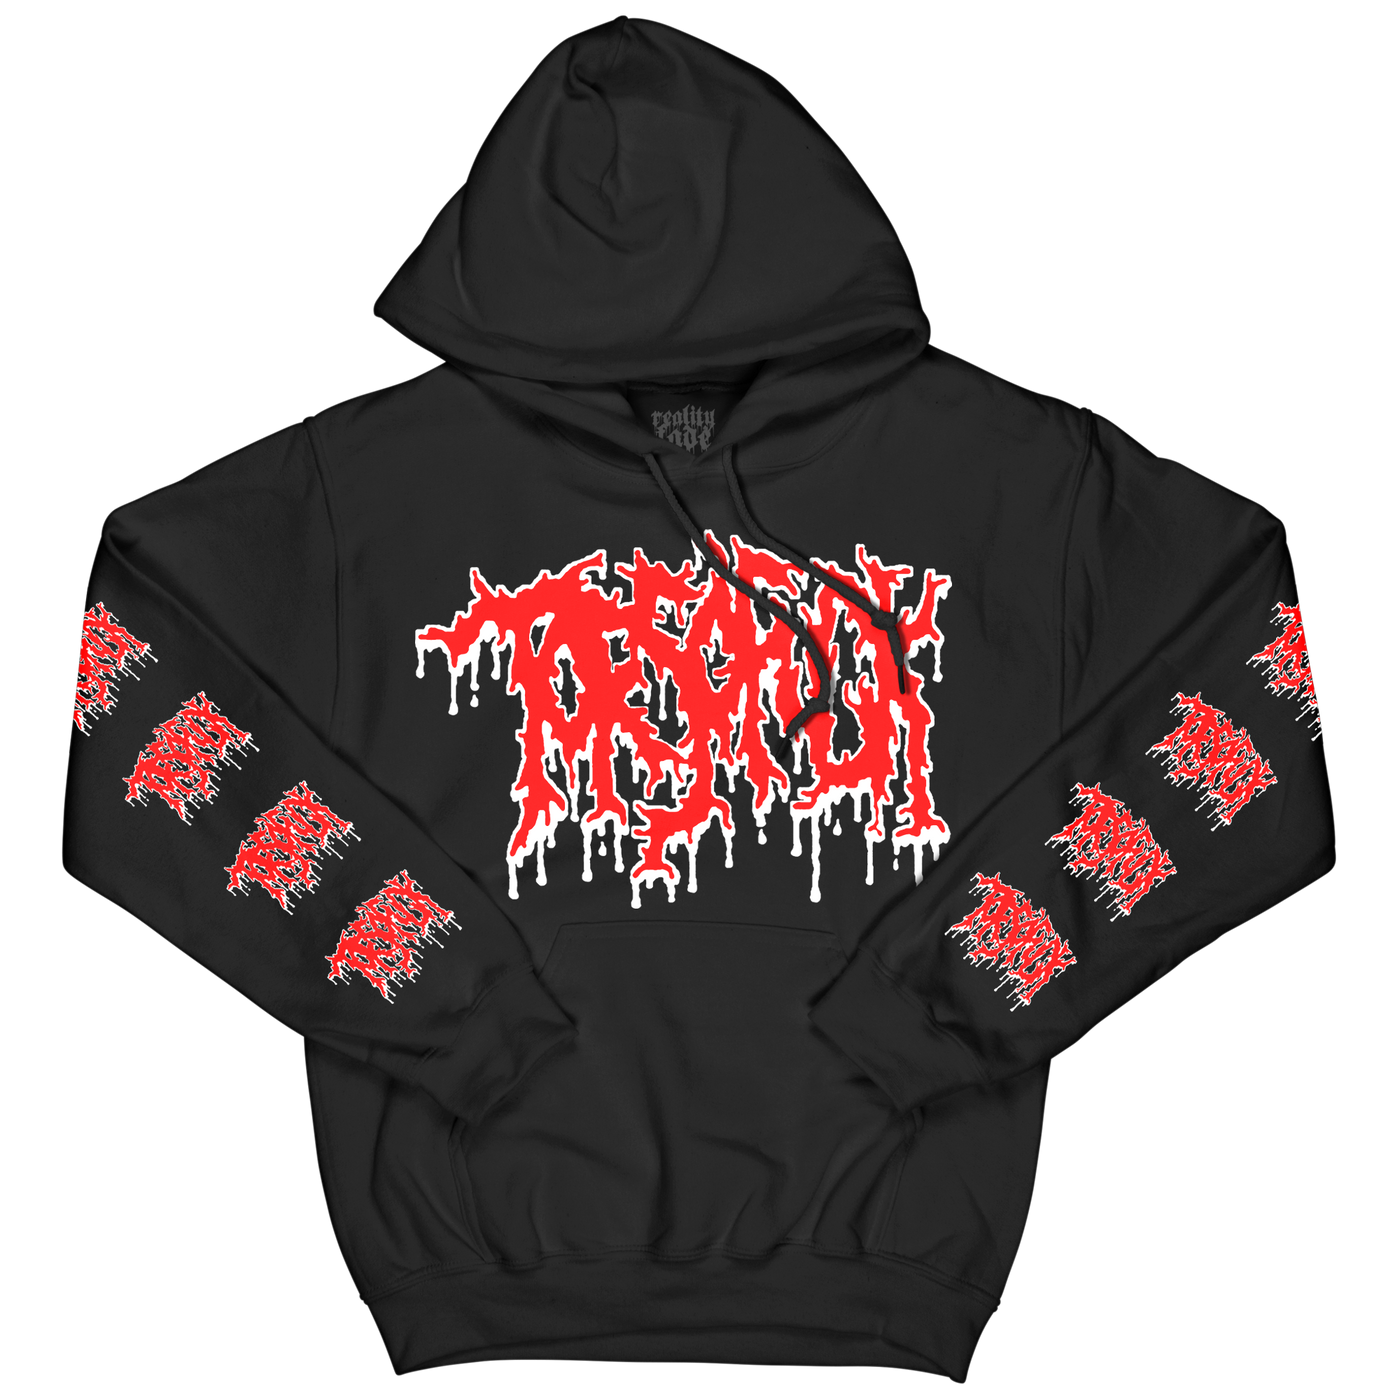 Torsofuck 'I Fucking Love To Eat Pussy' Hoodie | PRE-ORDER